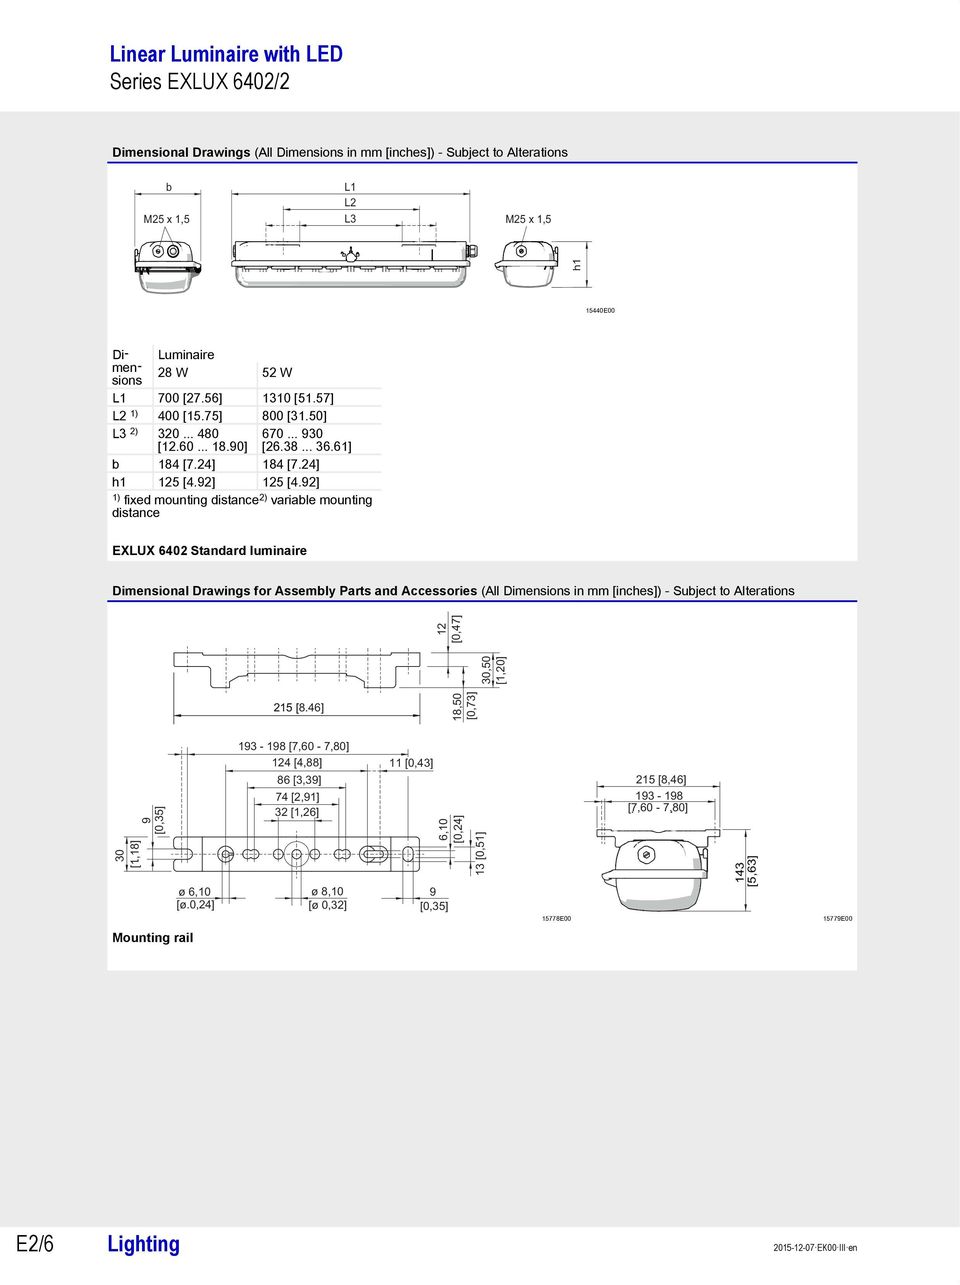 92] 1) fixed mounting distance 2) variable mounting distance EXLUX 6402 Standard luminaire Dimensional Drawings for Assembly Parts and Accessories (All Dimensions in mm [inches]) - Subject to